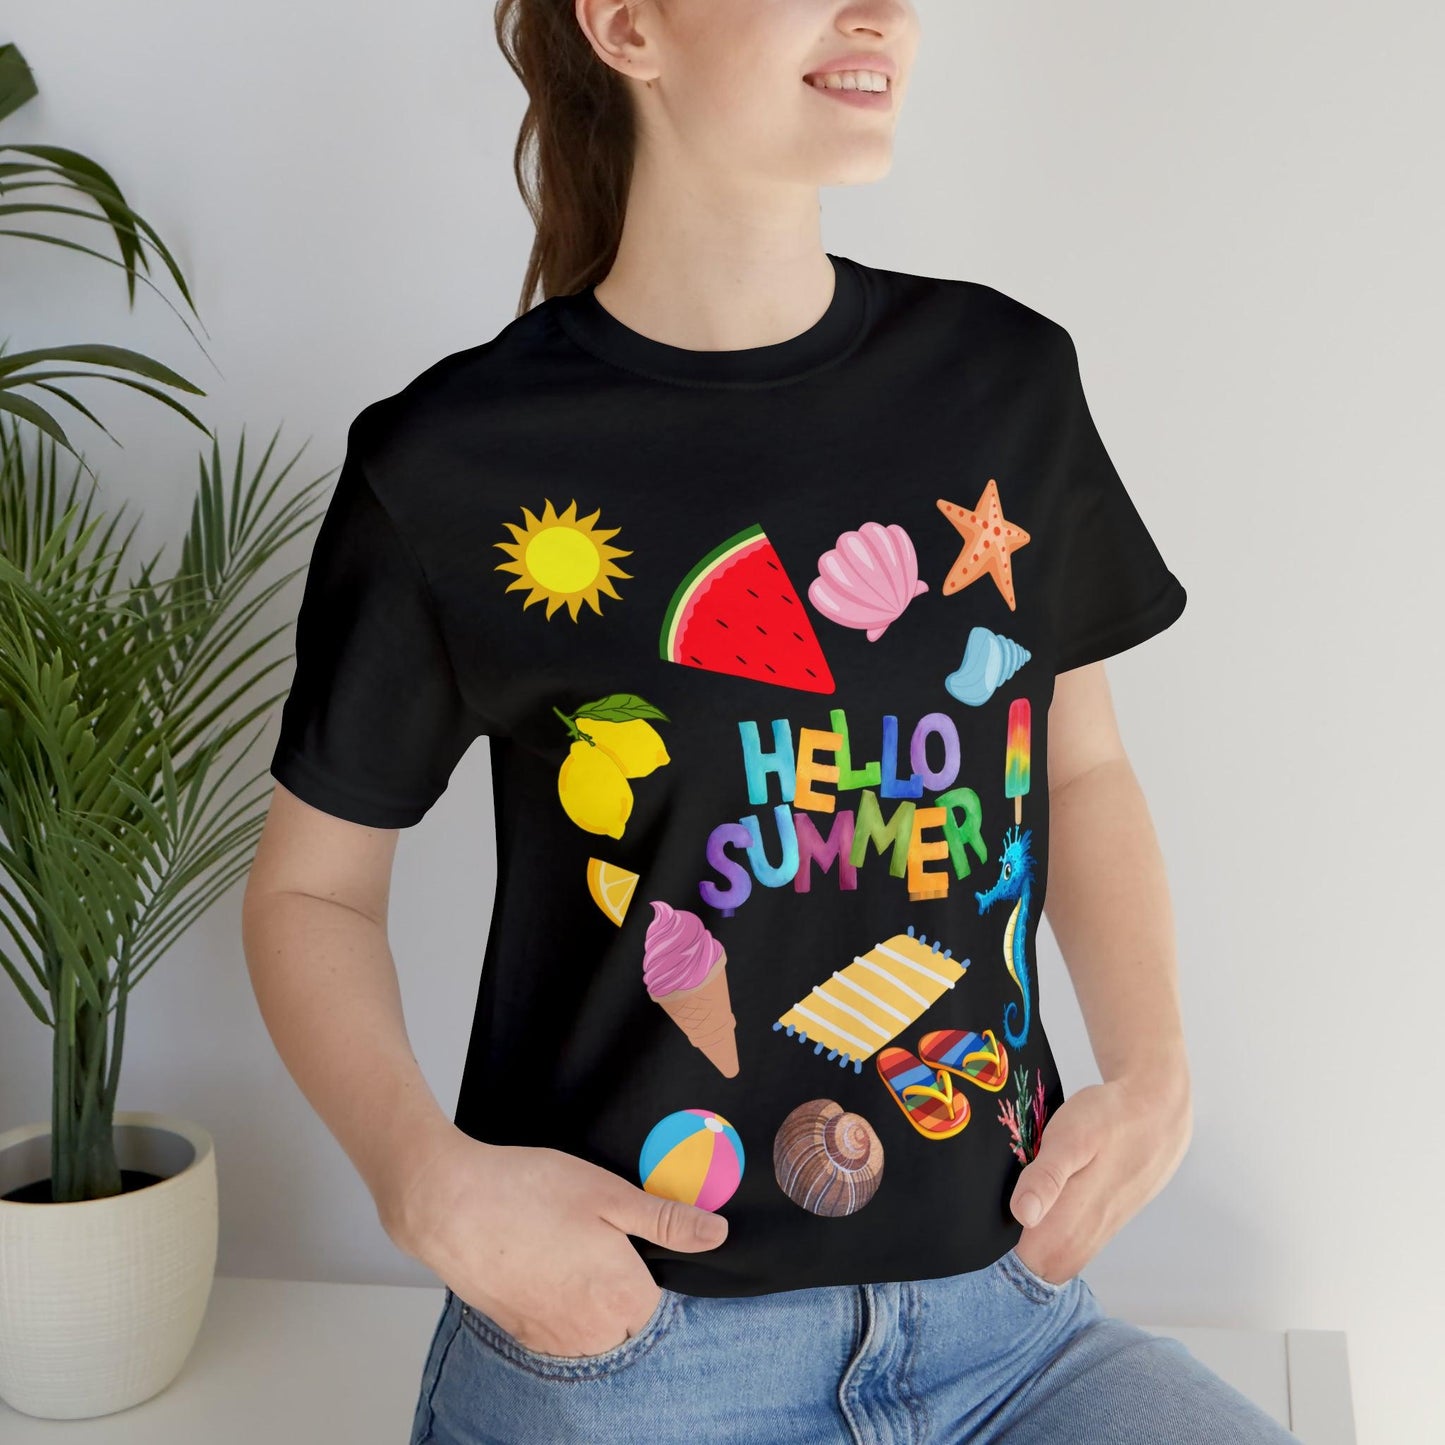 Hello Summer shirt, Funny Summer shirts for women and men, Summer Casual Top Tee